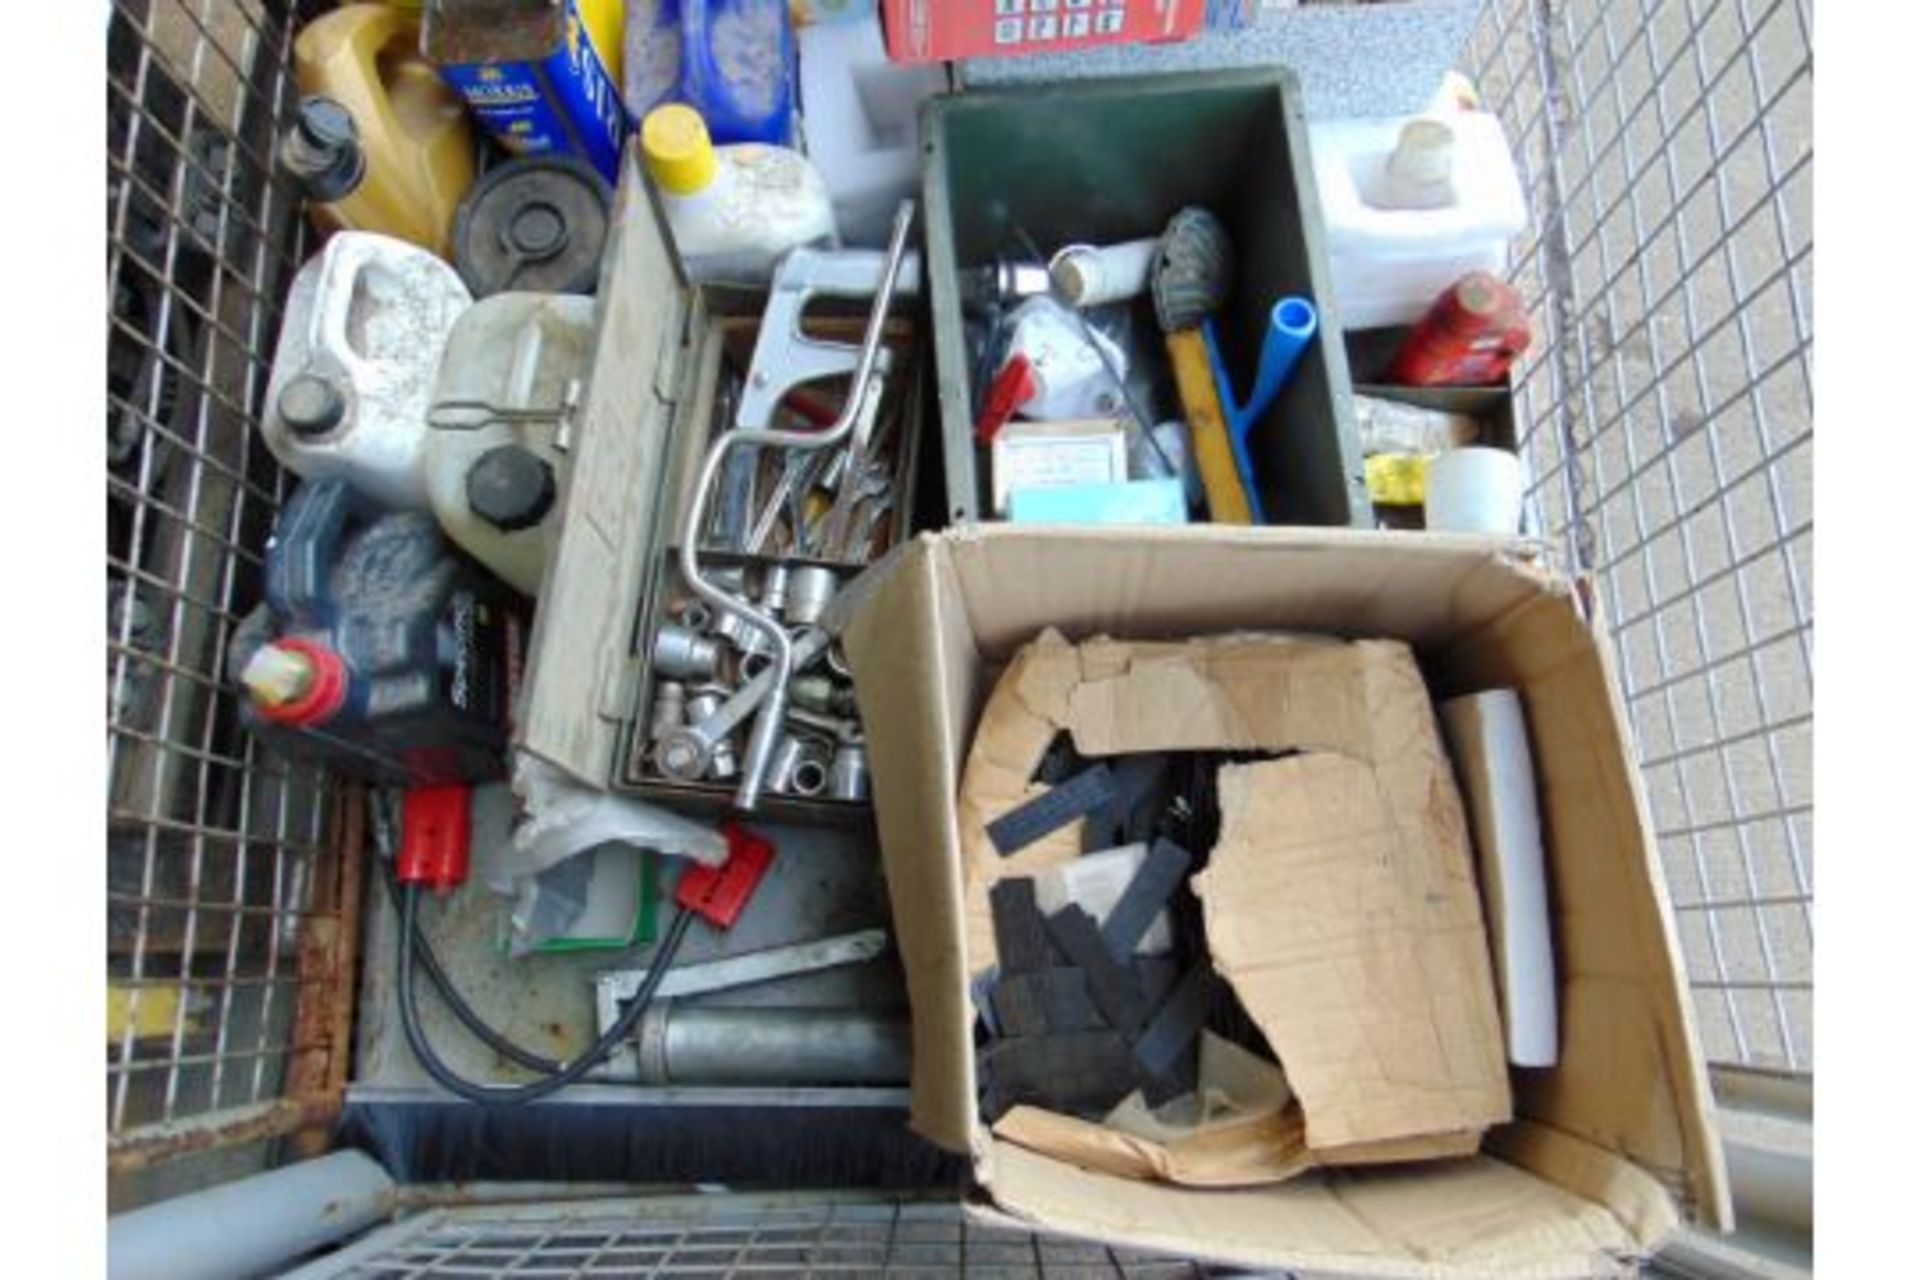 Stillage of Tools, Oils, Cleaners, Grease etc. - Image 2 of 3